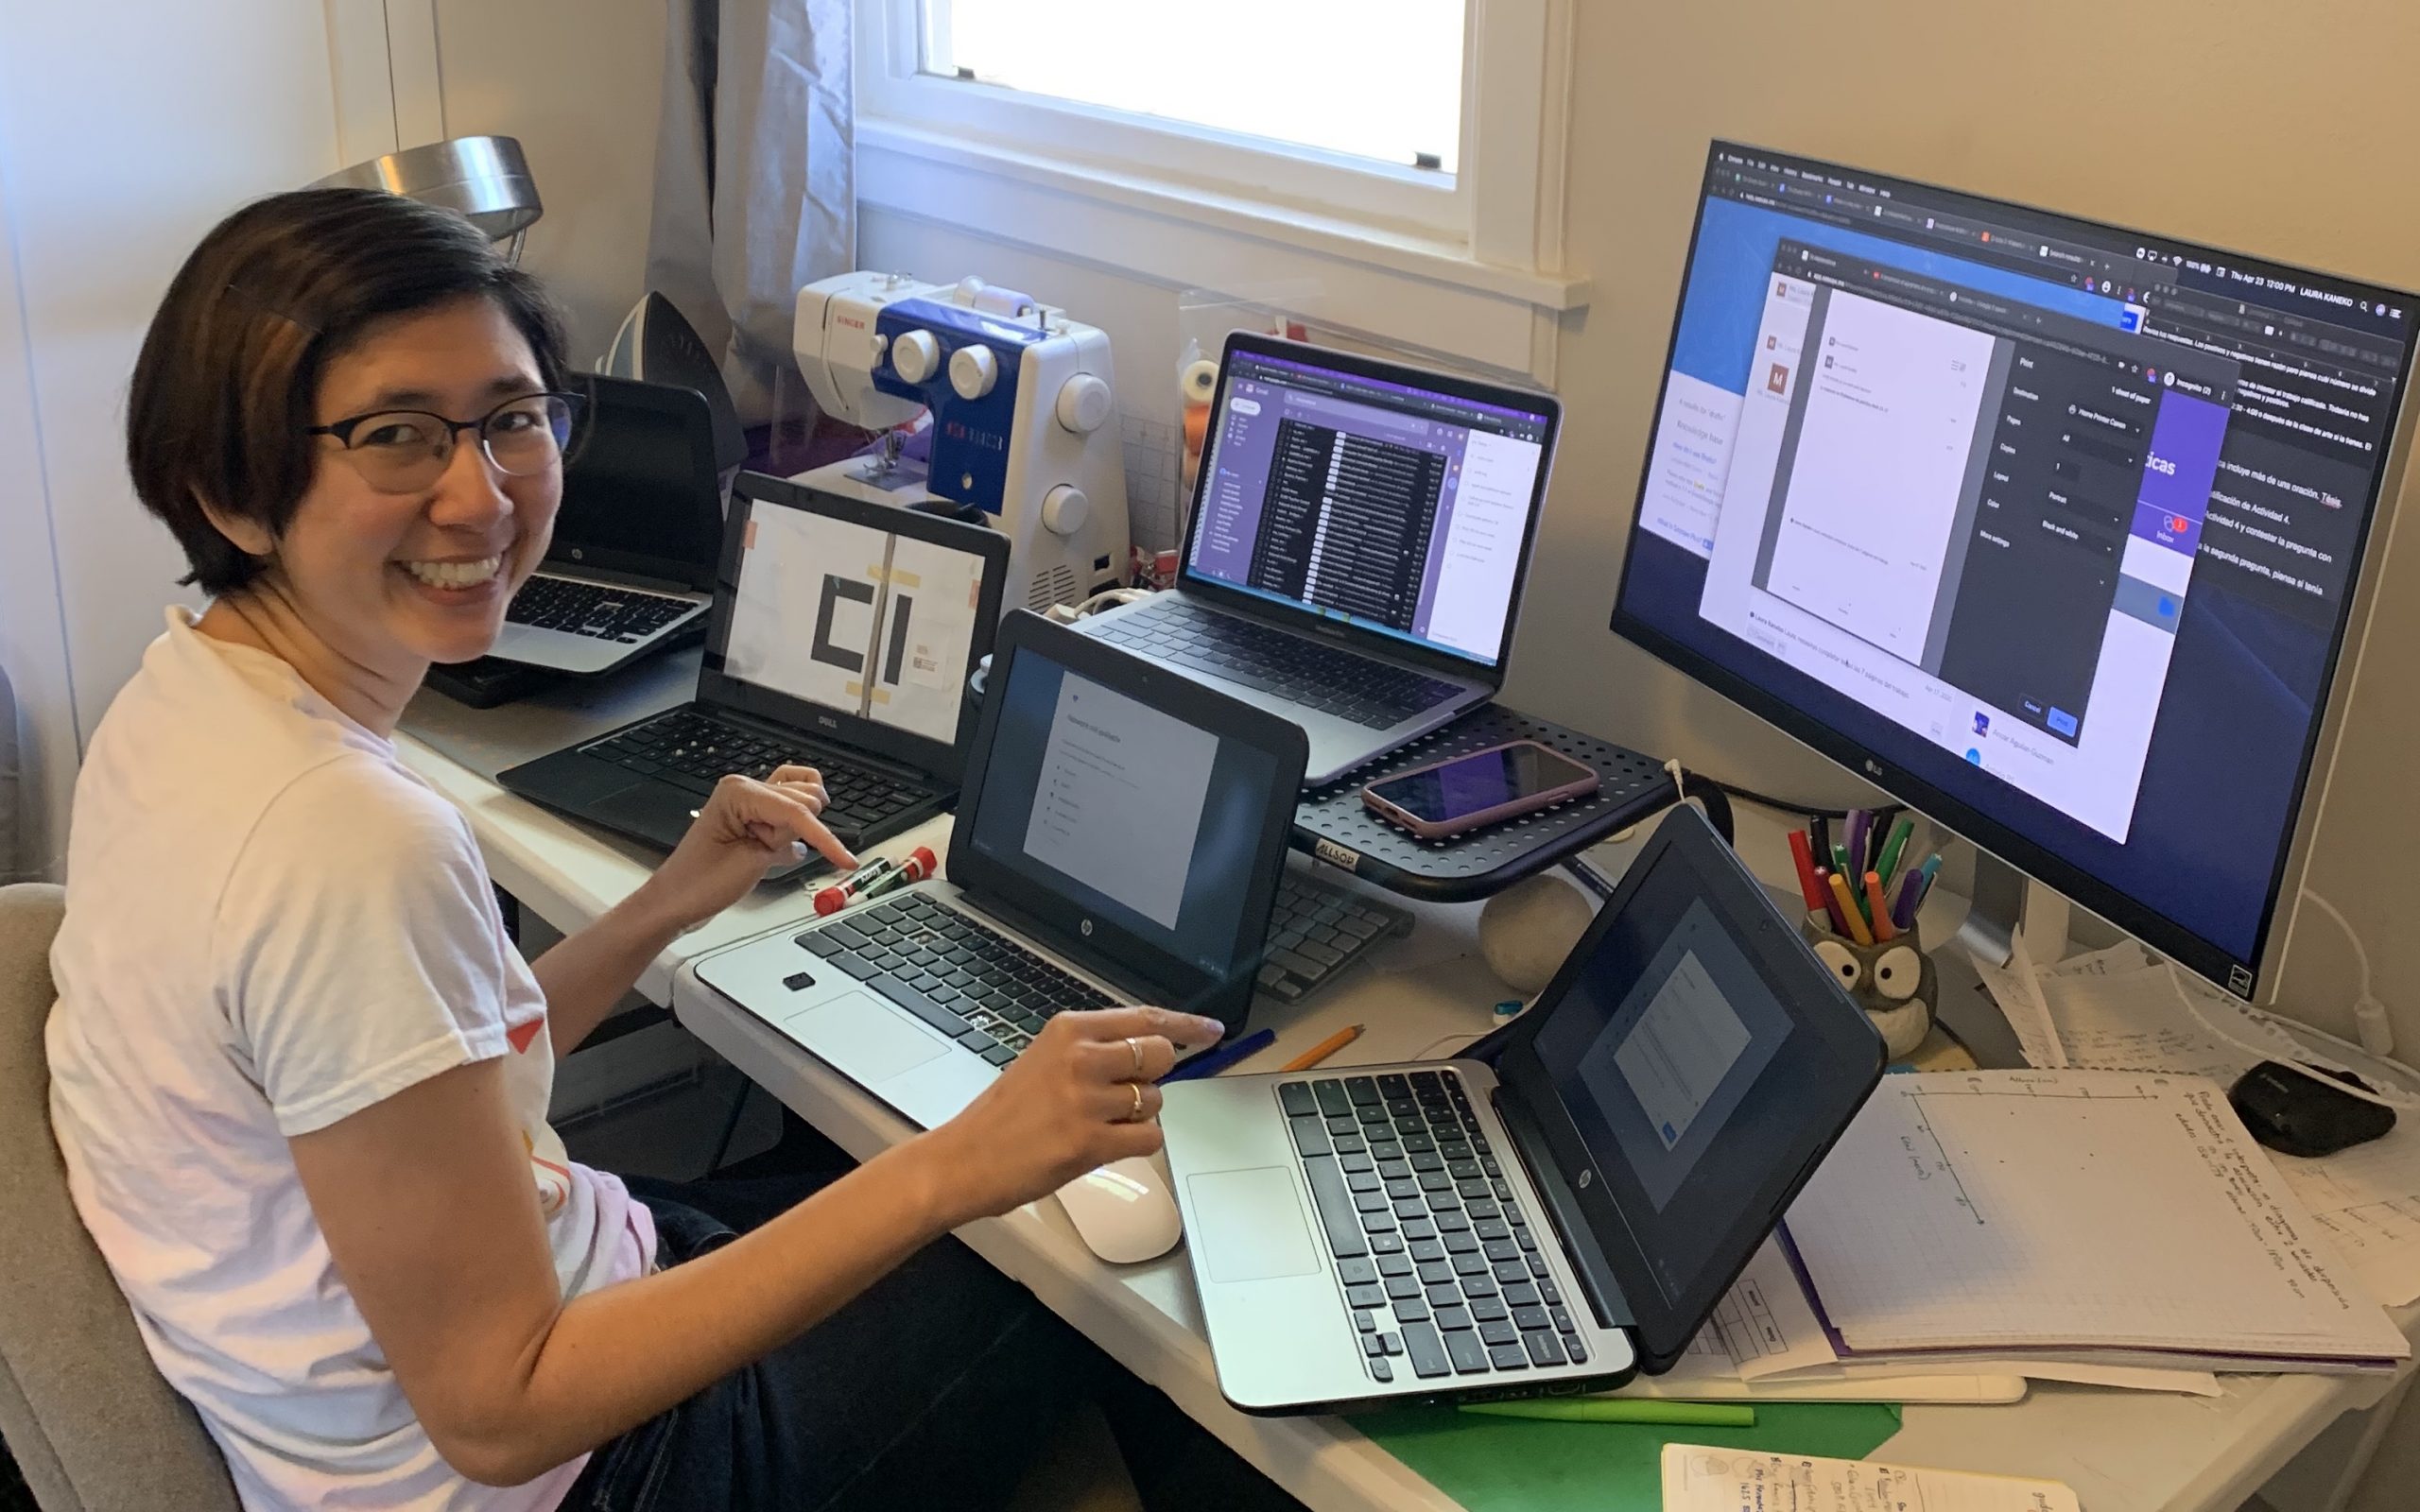 A smiling East Asian woman with a bob haircut and glasses is sitting at a large desk with several Chromebook laptops in front of her, plus a big monitor.